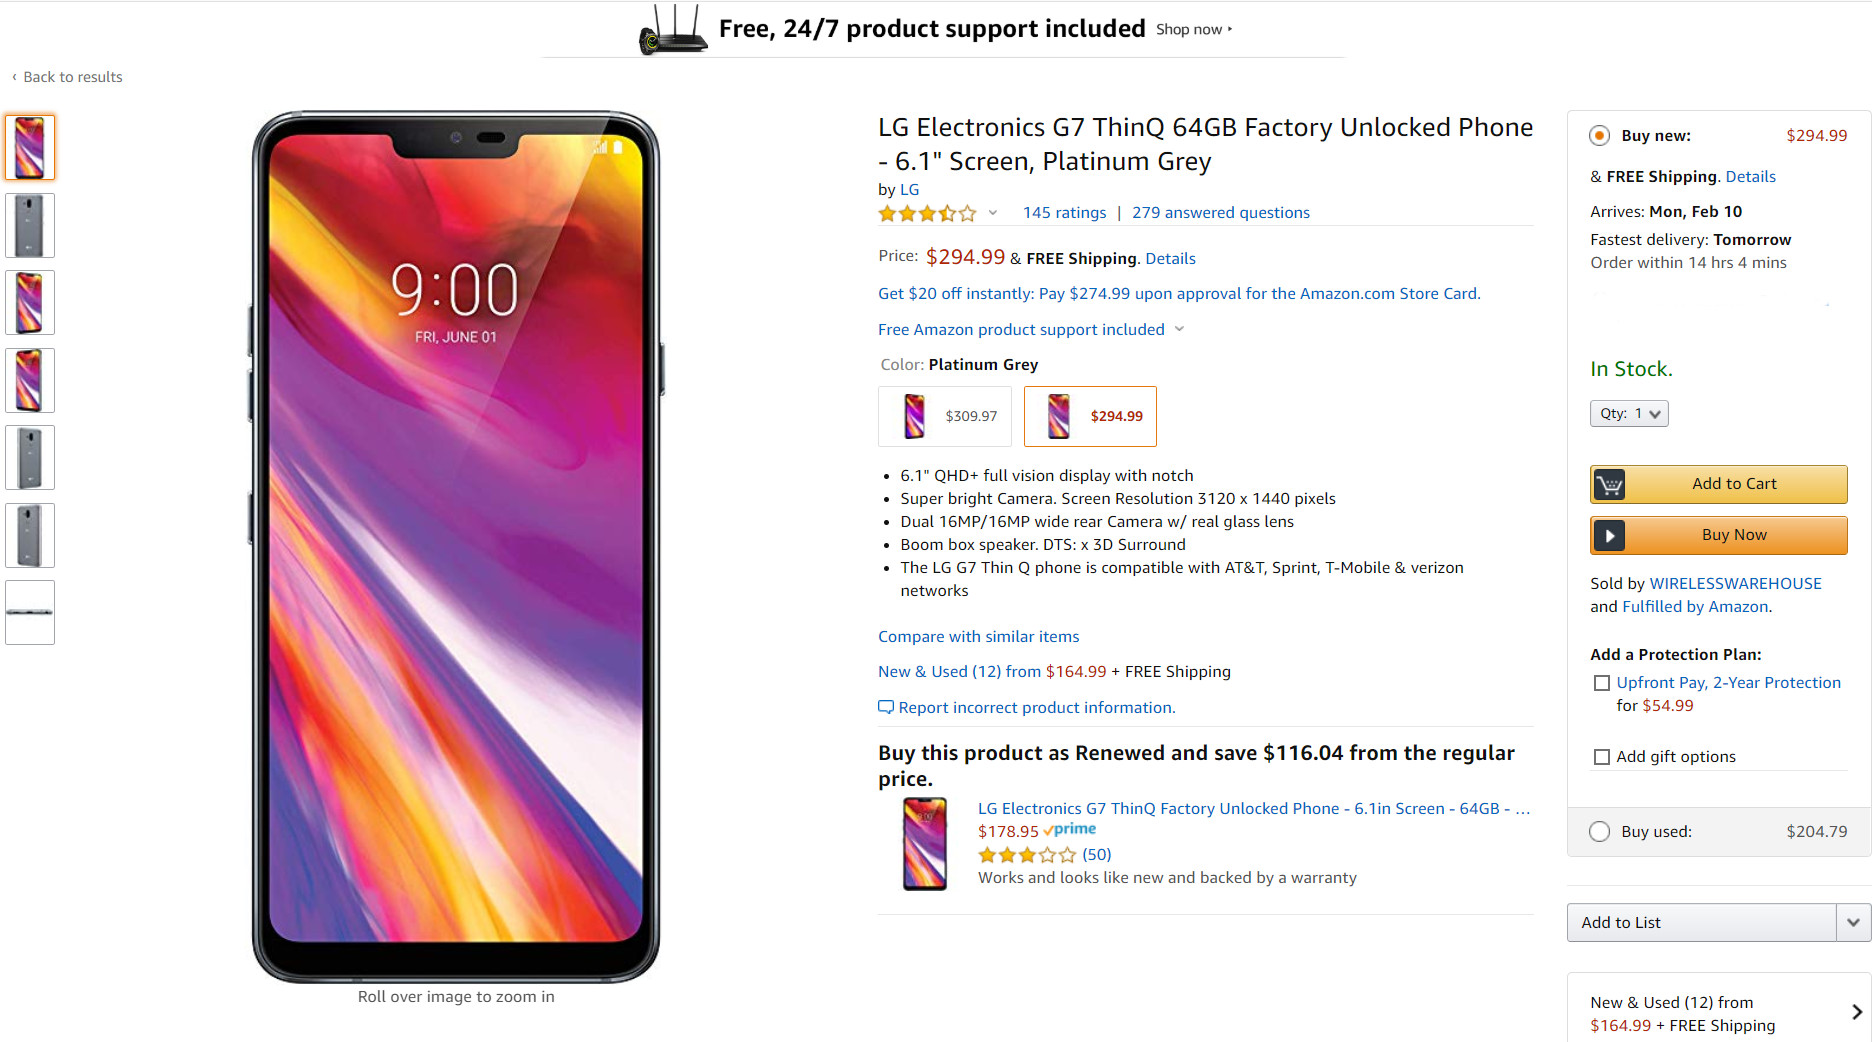 The discounted LG G7 on Amazon.